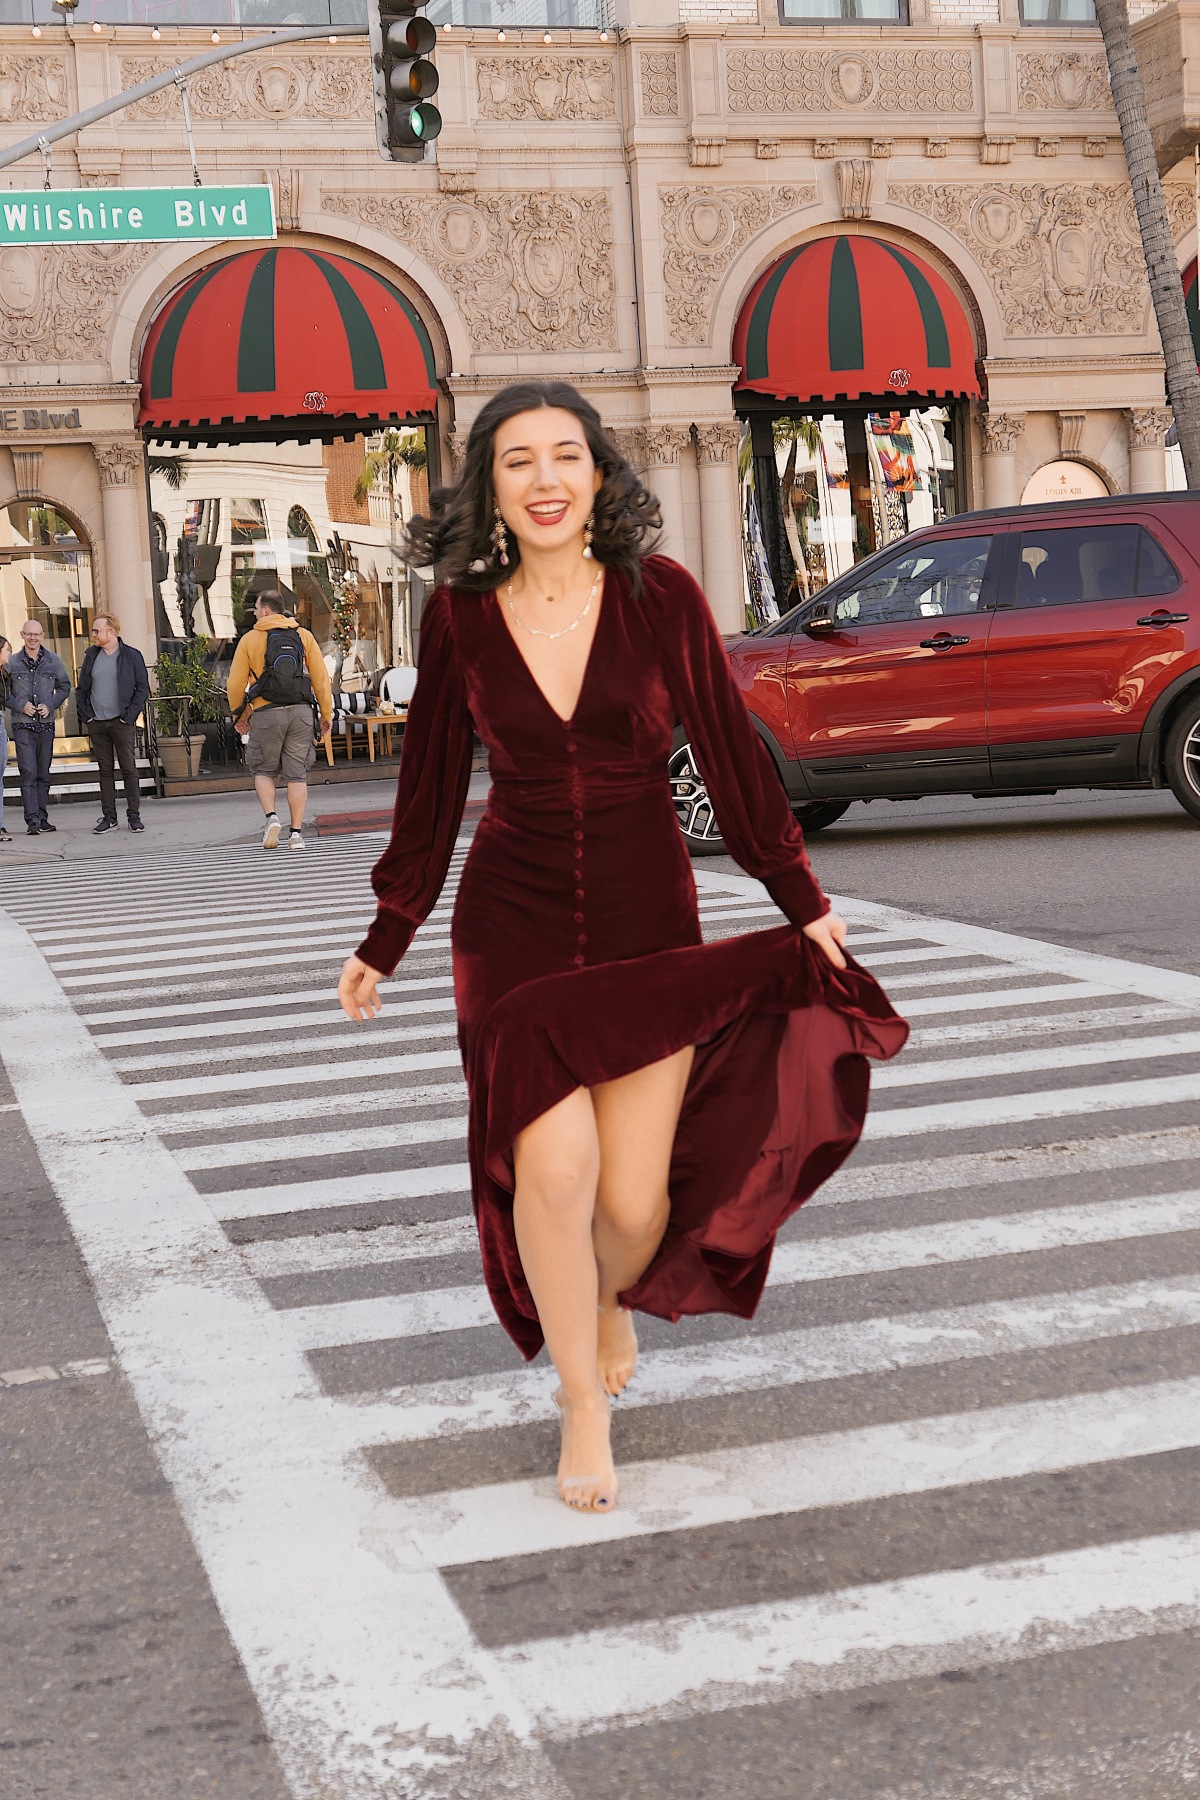 red velvet, Christmas dress, Christmas outfit, gown, red velvet, fashion blogger, LA blogger, Beverly Hills, Christmas in Beverly Hills, Christmas in Los Angeles, high fashion, luxury, Edwardian, vintage, rhinestone necklace, rhinestone earrings, Nanamacs, Jeffrey Campbell shoes, curly hair, red lips